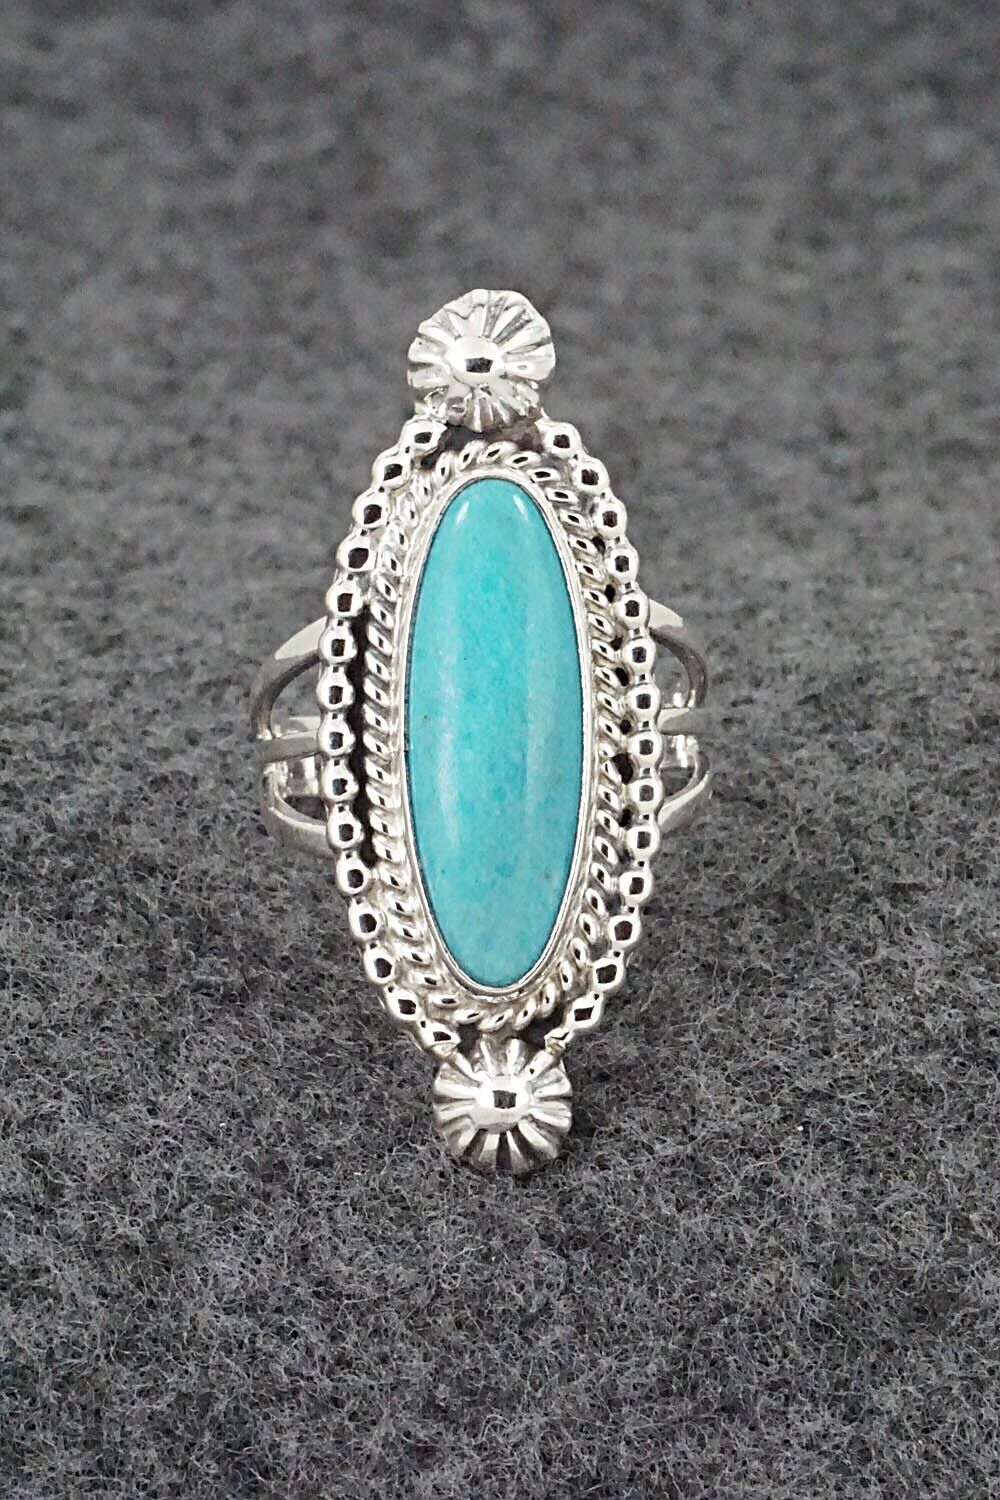 Turquoise & Sterling Silver Ring - Samuel Yellowhair - Size 6